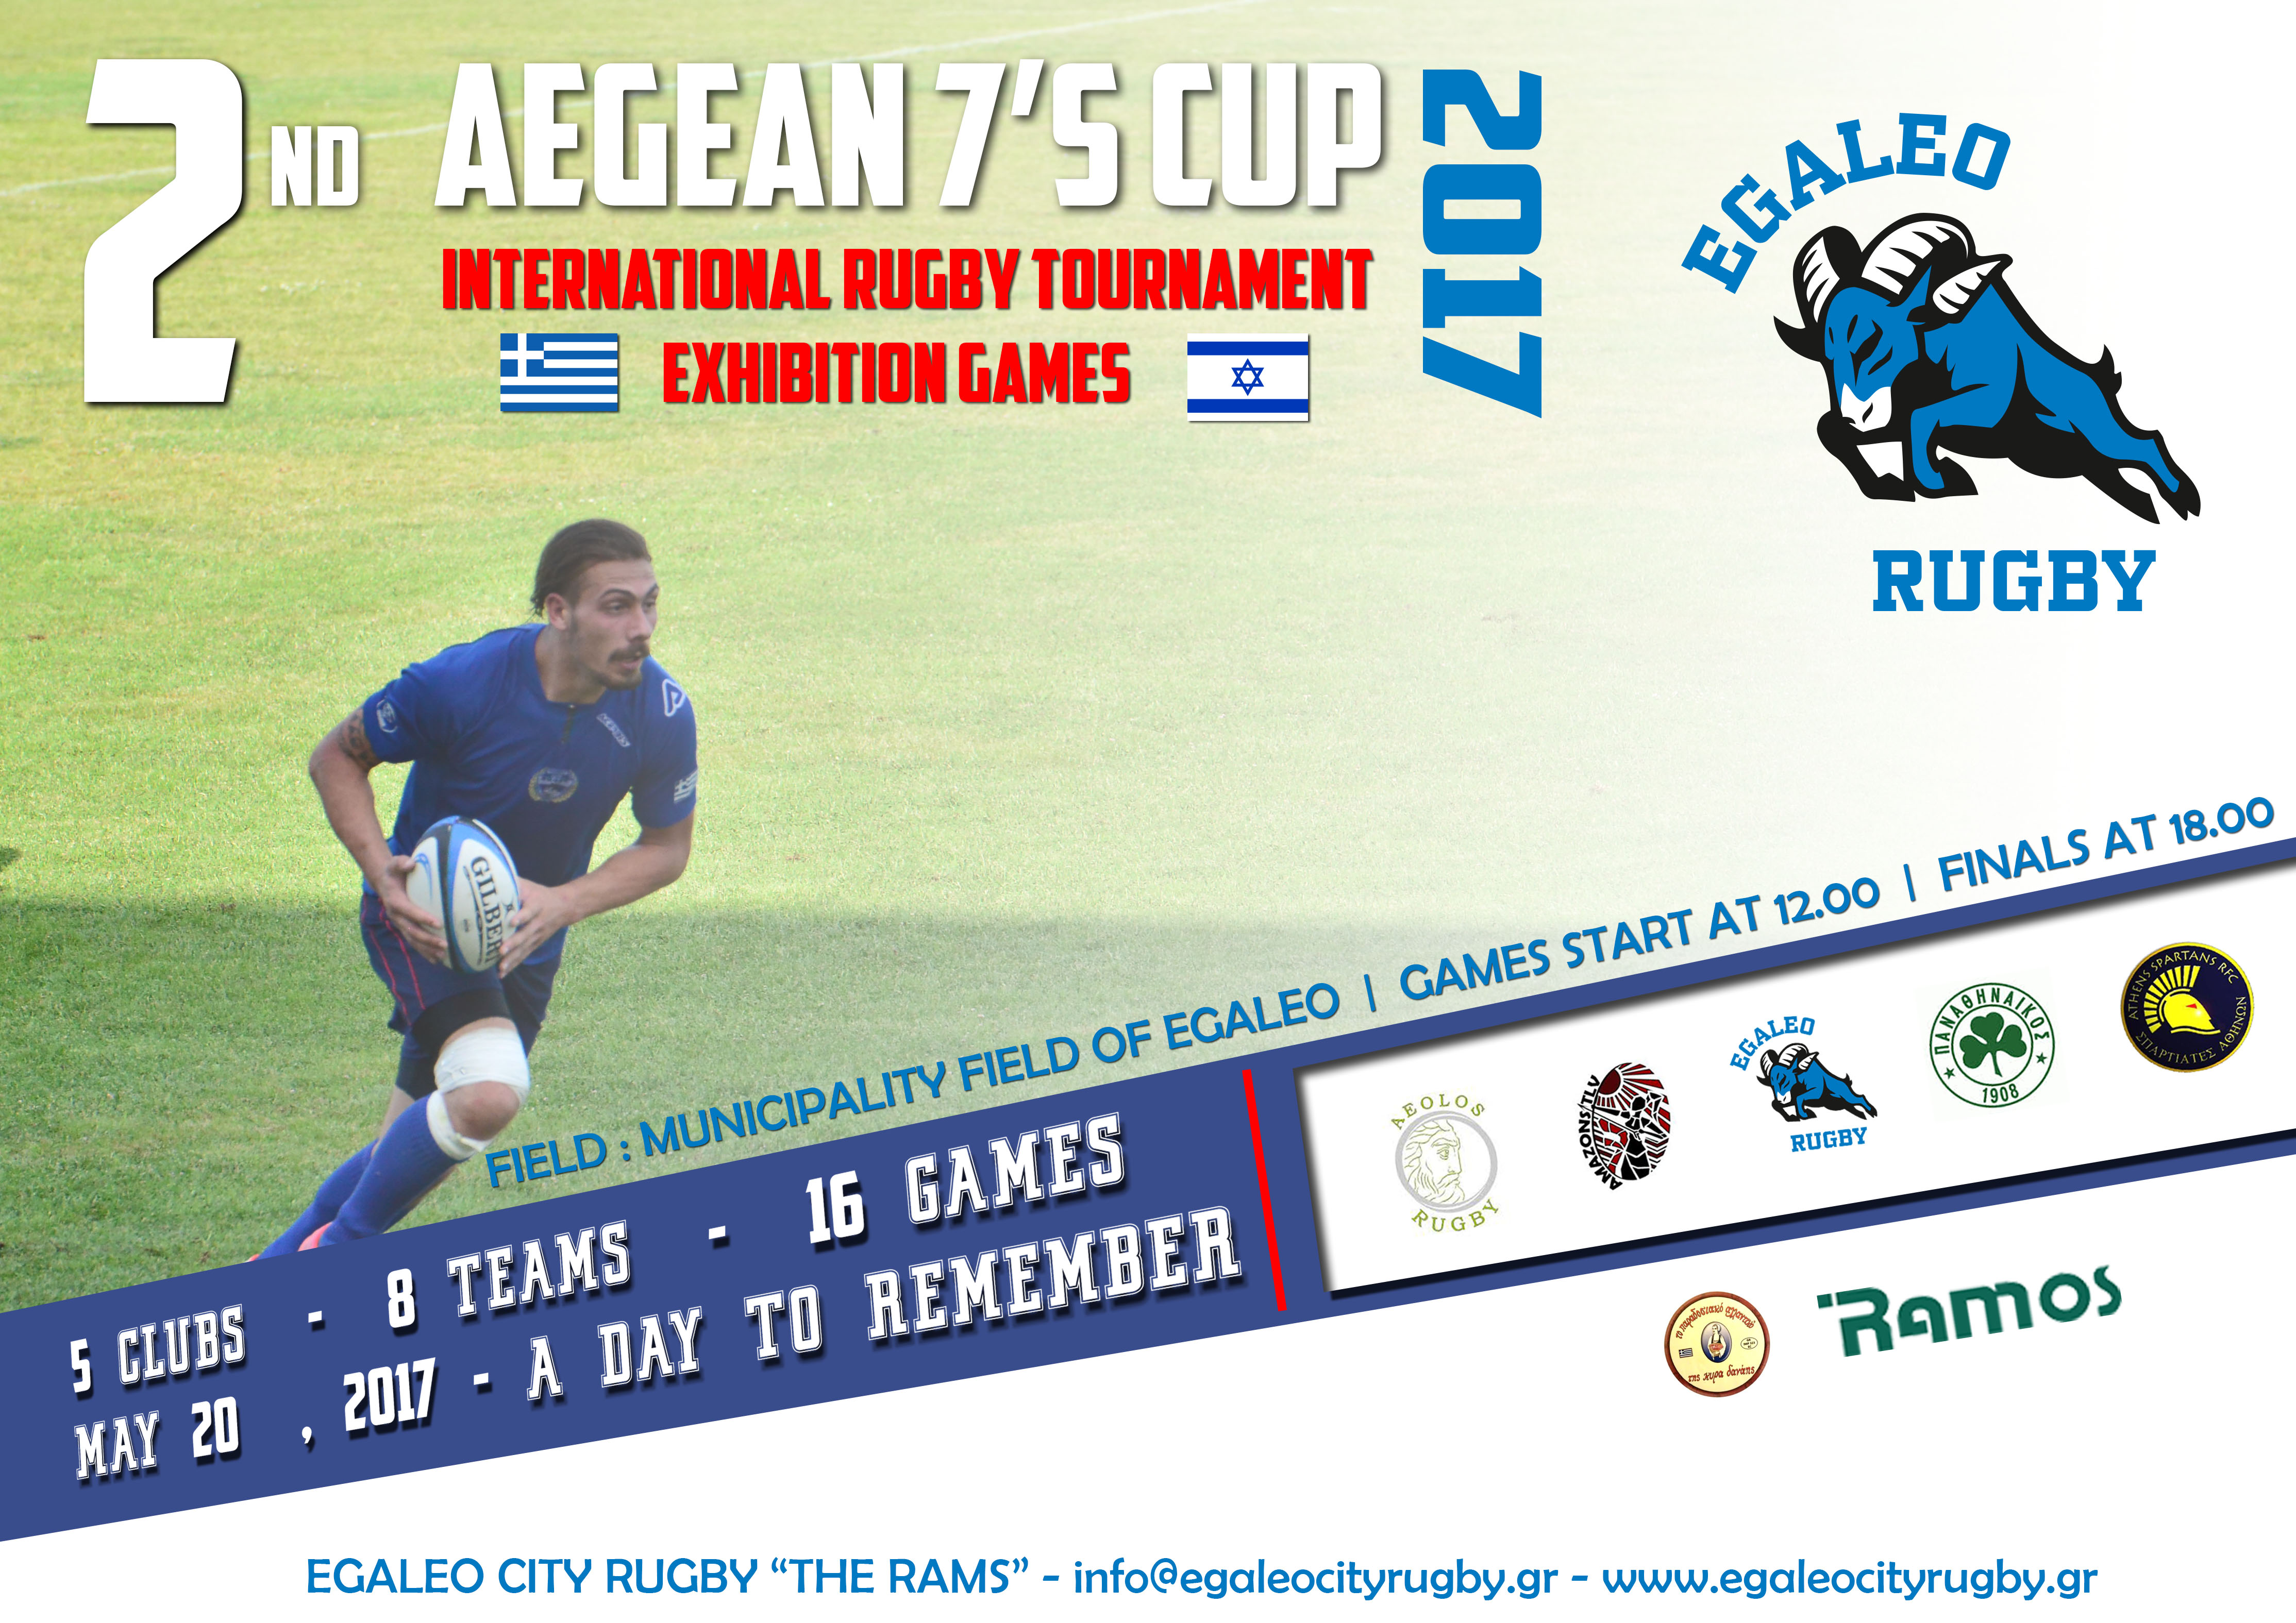 2nd Aegean 7's Cup